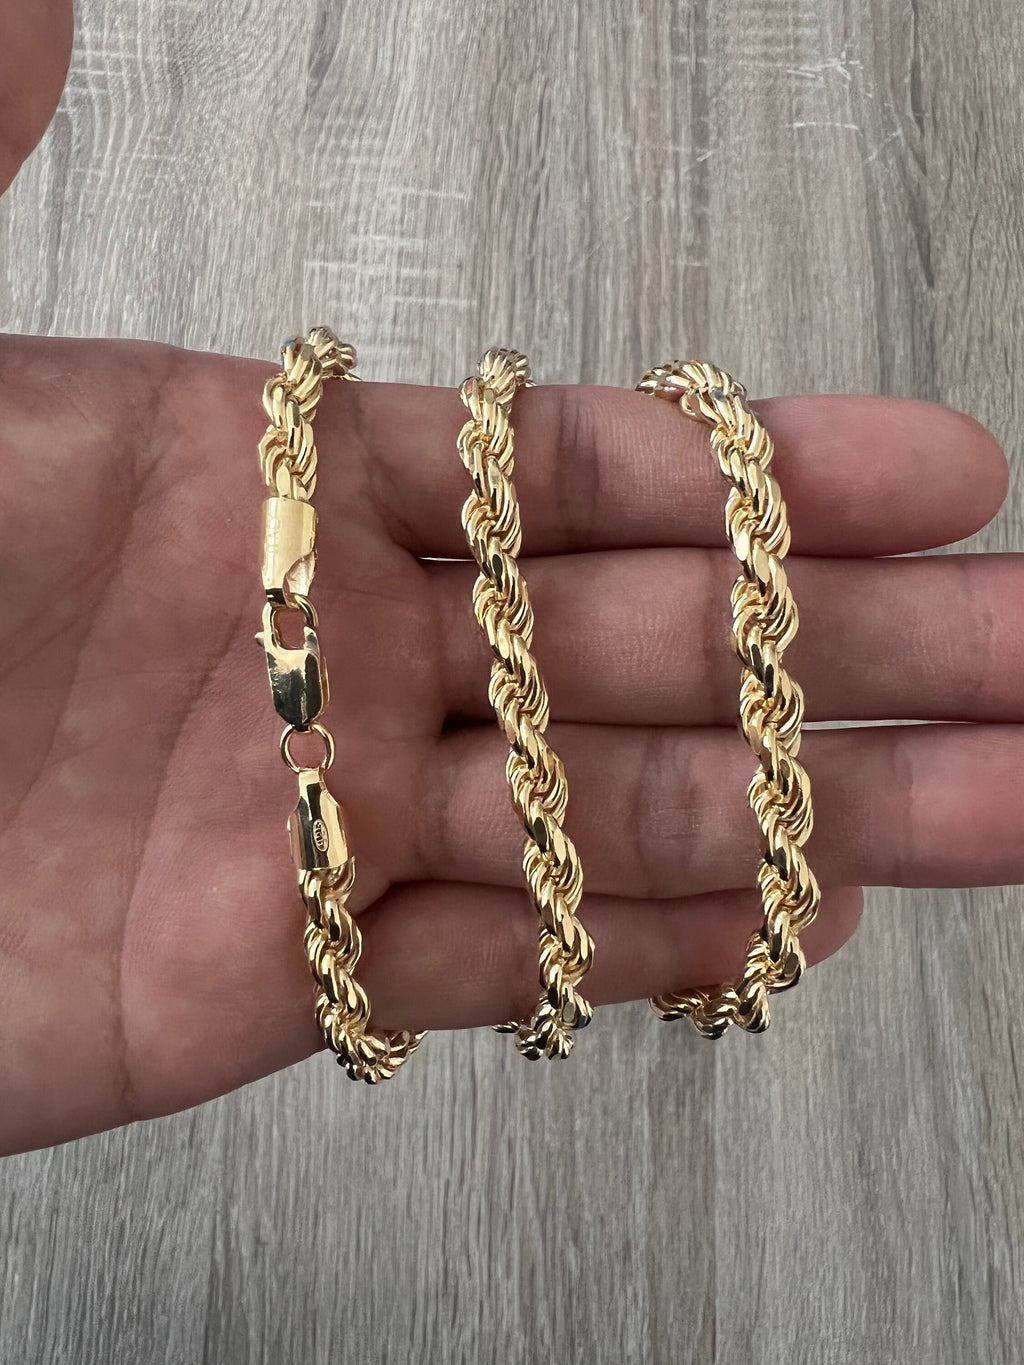 6mm Rope 14K Gold Vermeil Over Solid 925 Sterling Silver Chain Necklac –  Daniel Jeweler